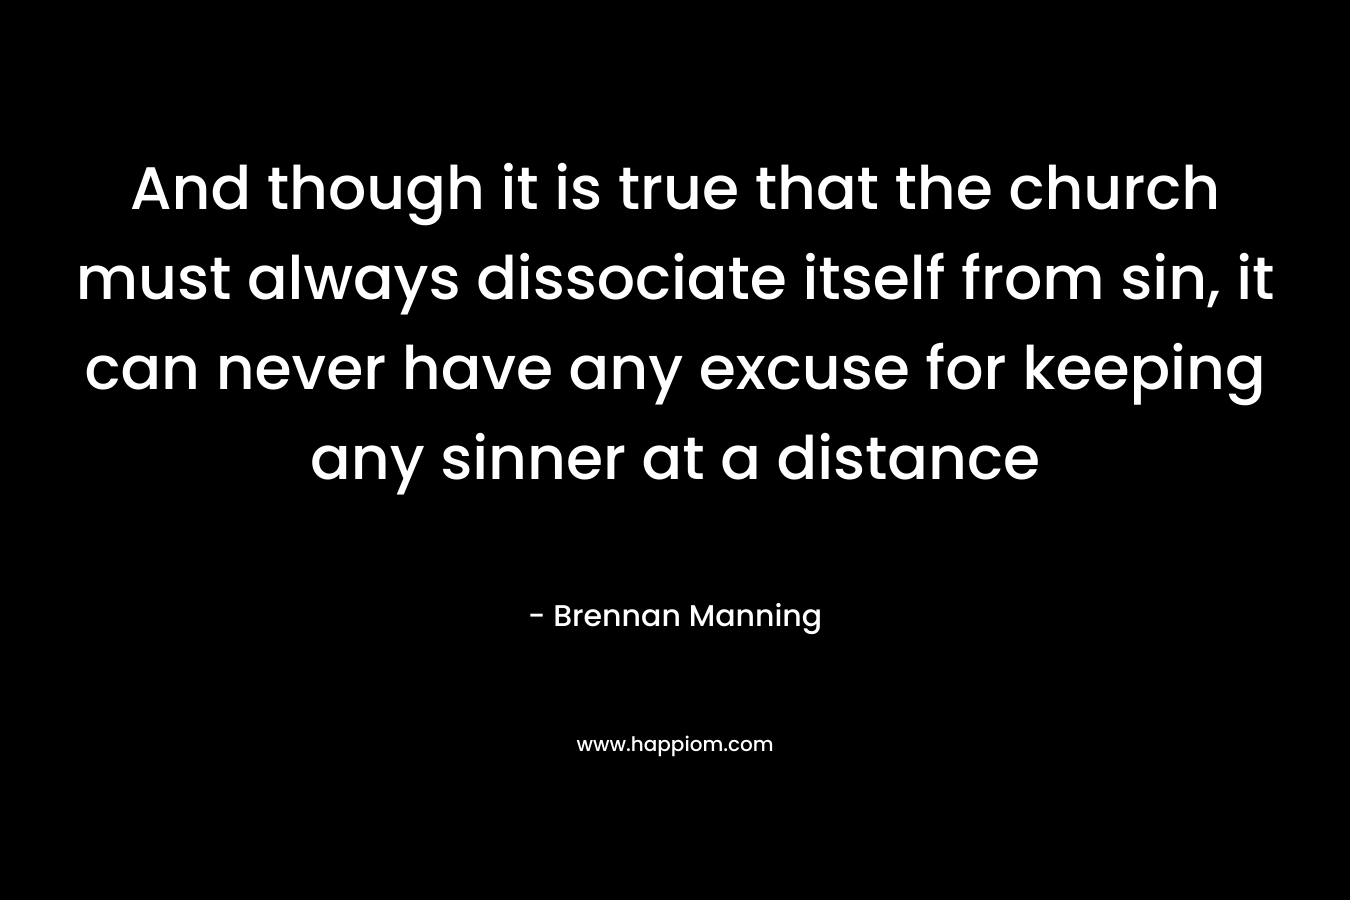 And though it is true that the church must always dissociate itself from sin, it can never have any excuse for keeping any sinner at a distance